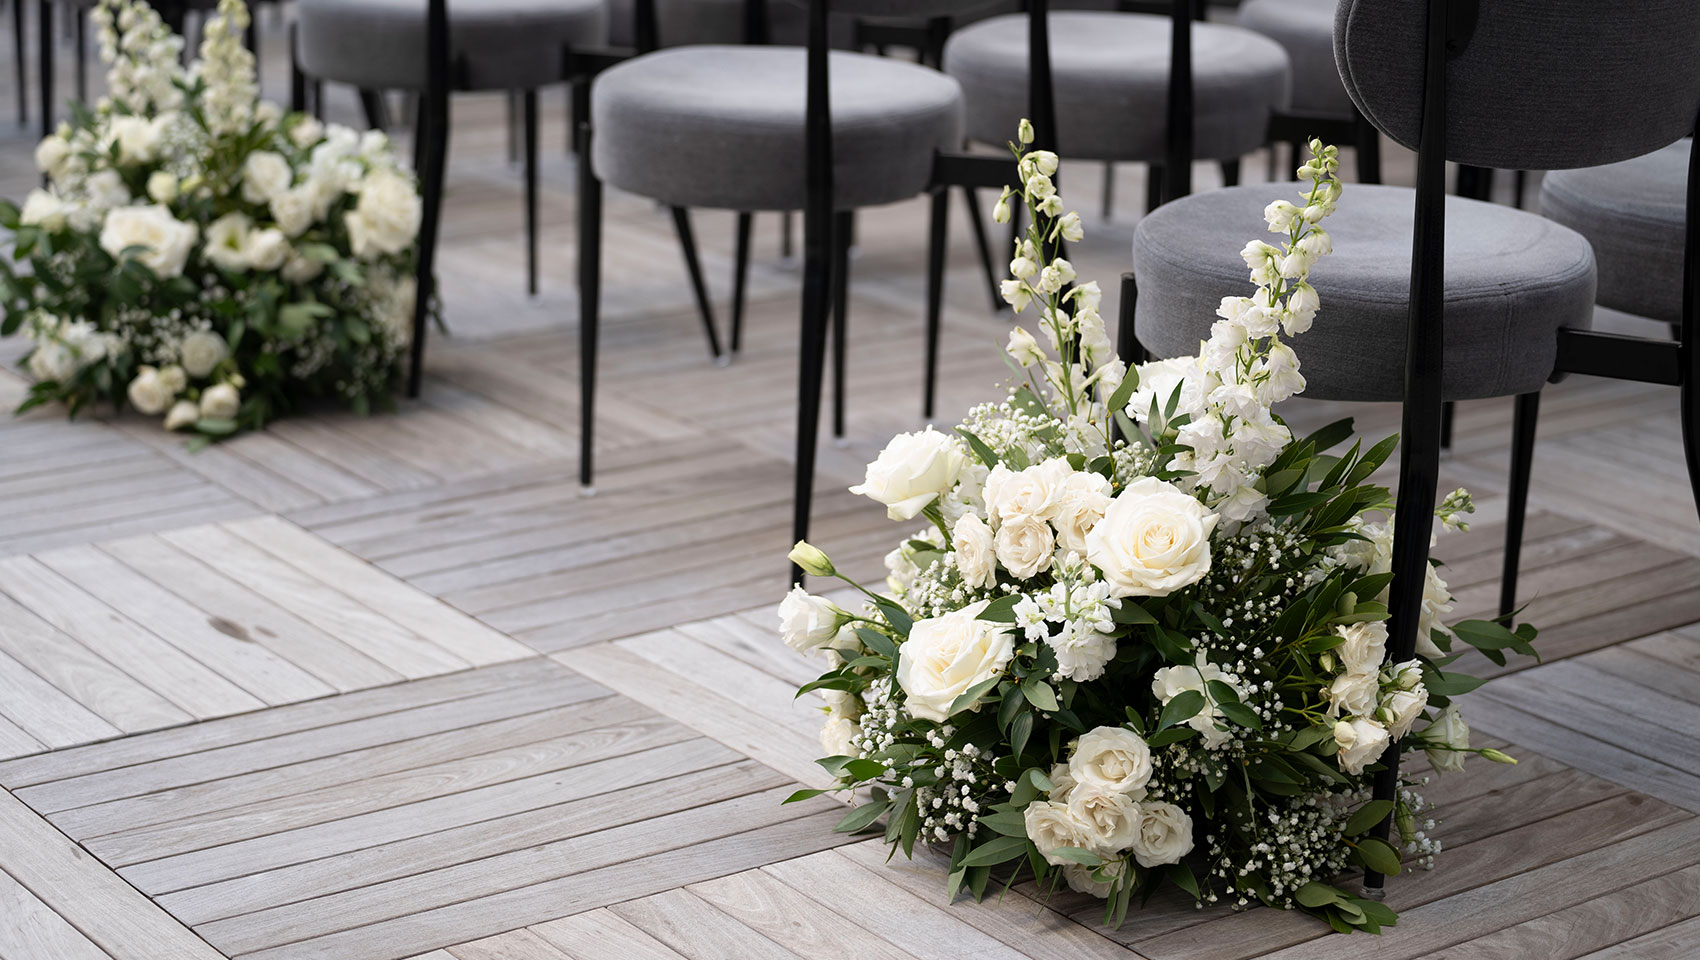 Ceremony Chairs & Florals on King Terrace